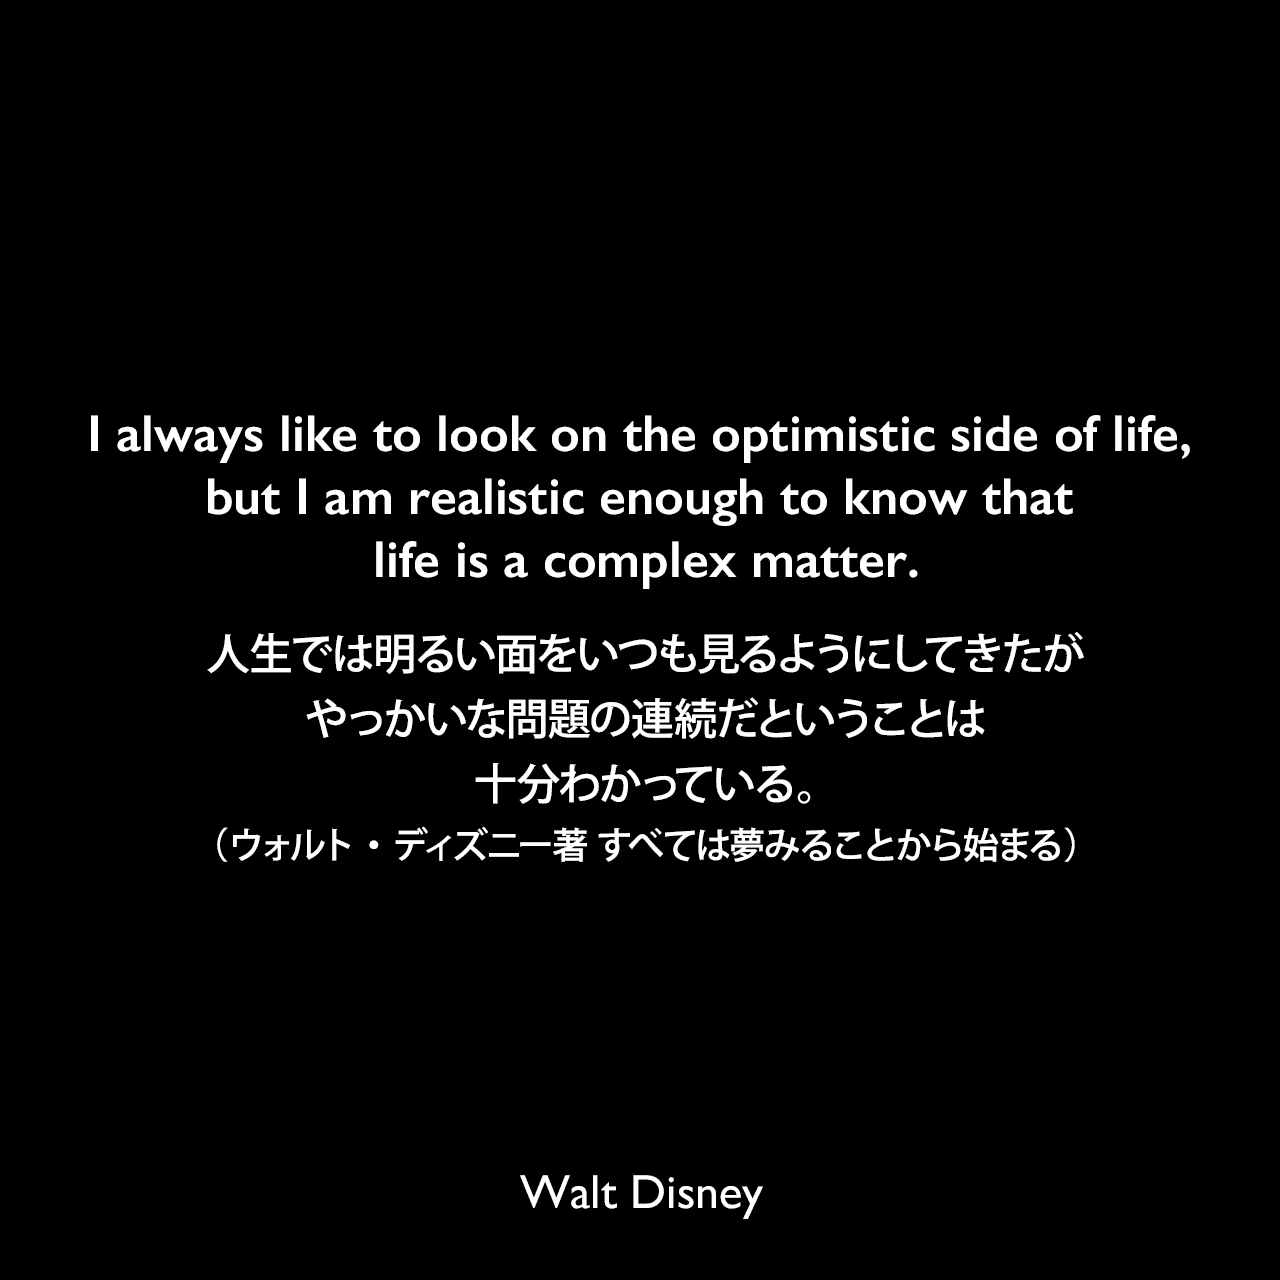 I always like to look on the optimistic side of life, but I am realistic enough to know that life is a complex matter.人生では明るい面をいつも見るようにしてきたが、やっかいな問題の連続だということは十分わかっている。- パットウィリアムズによる本「How to Be Like Walt: Capturing the Disney Magic Every Day of Your Life」よりWalt Disney